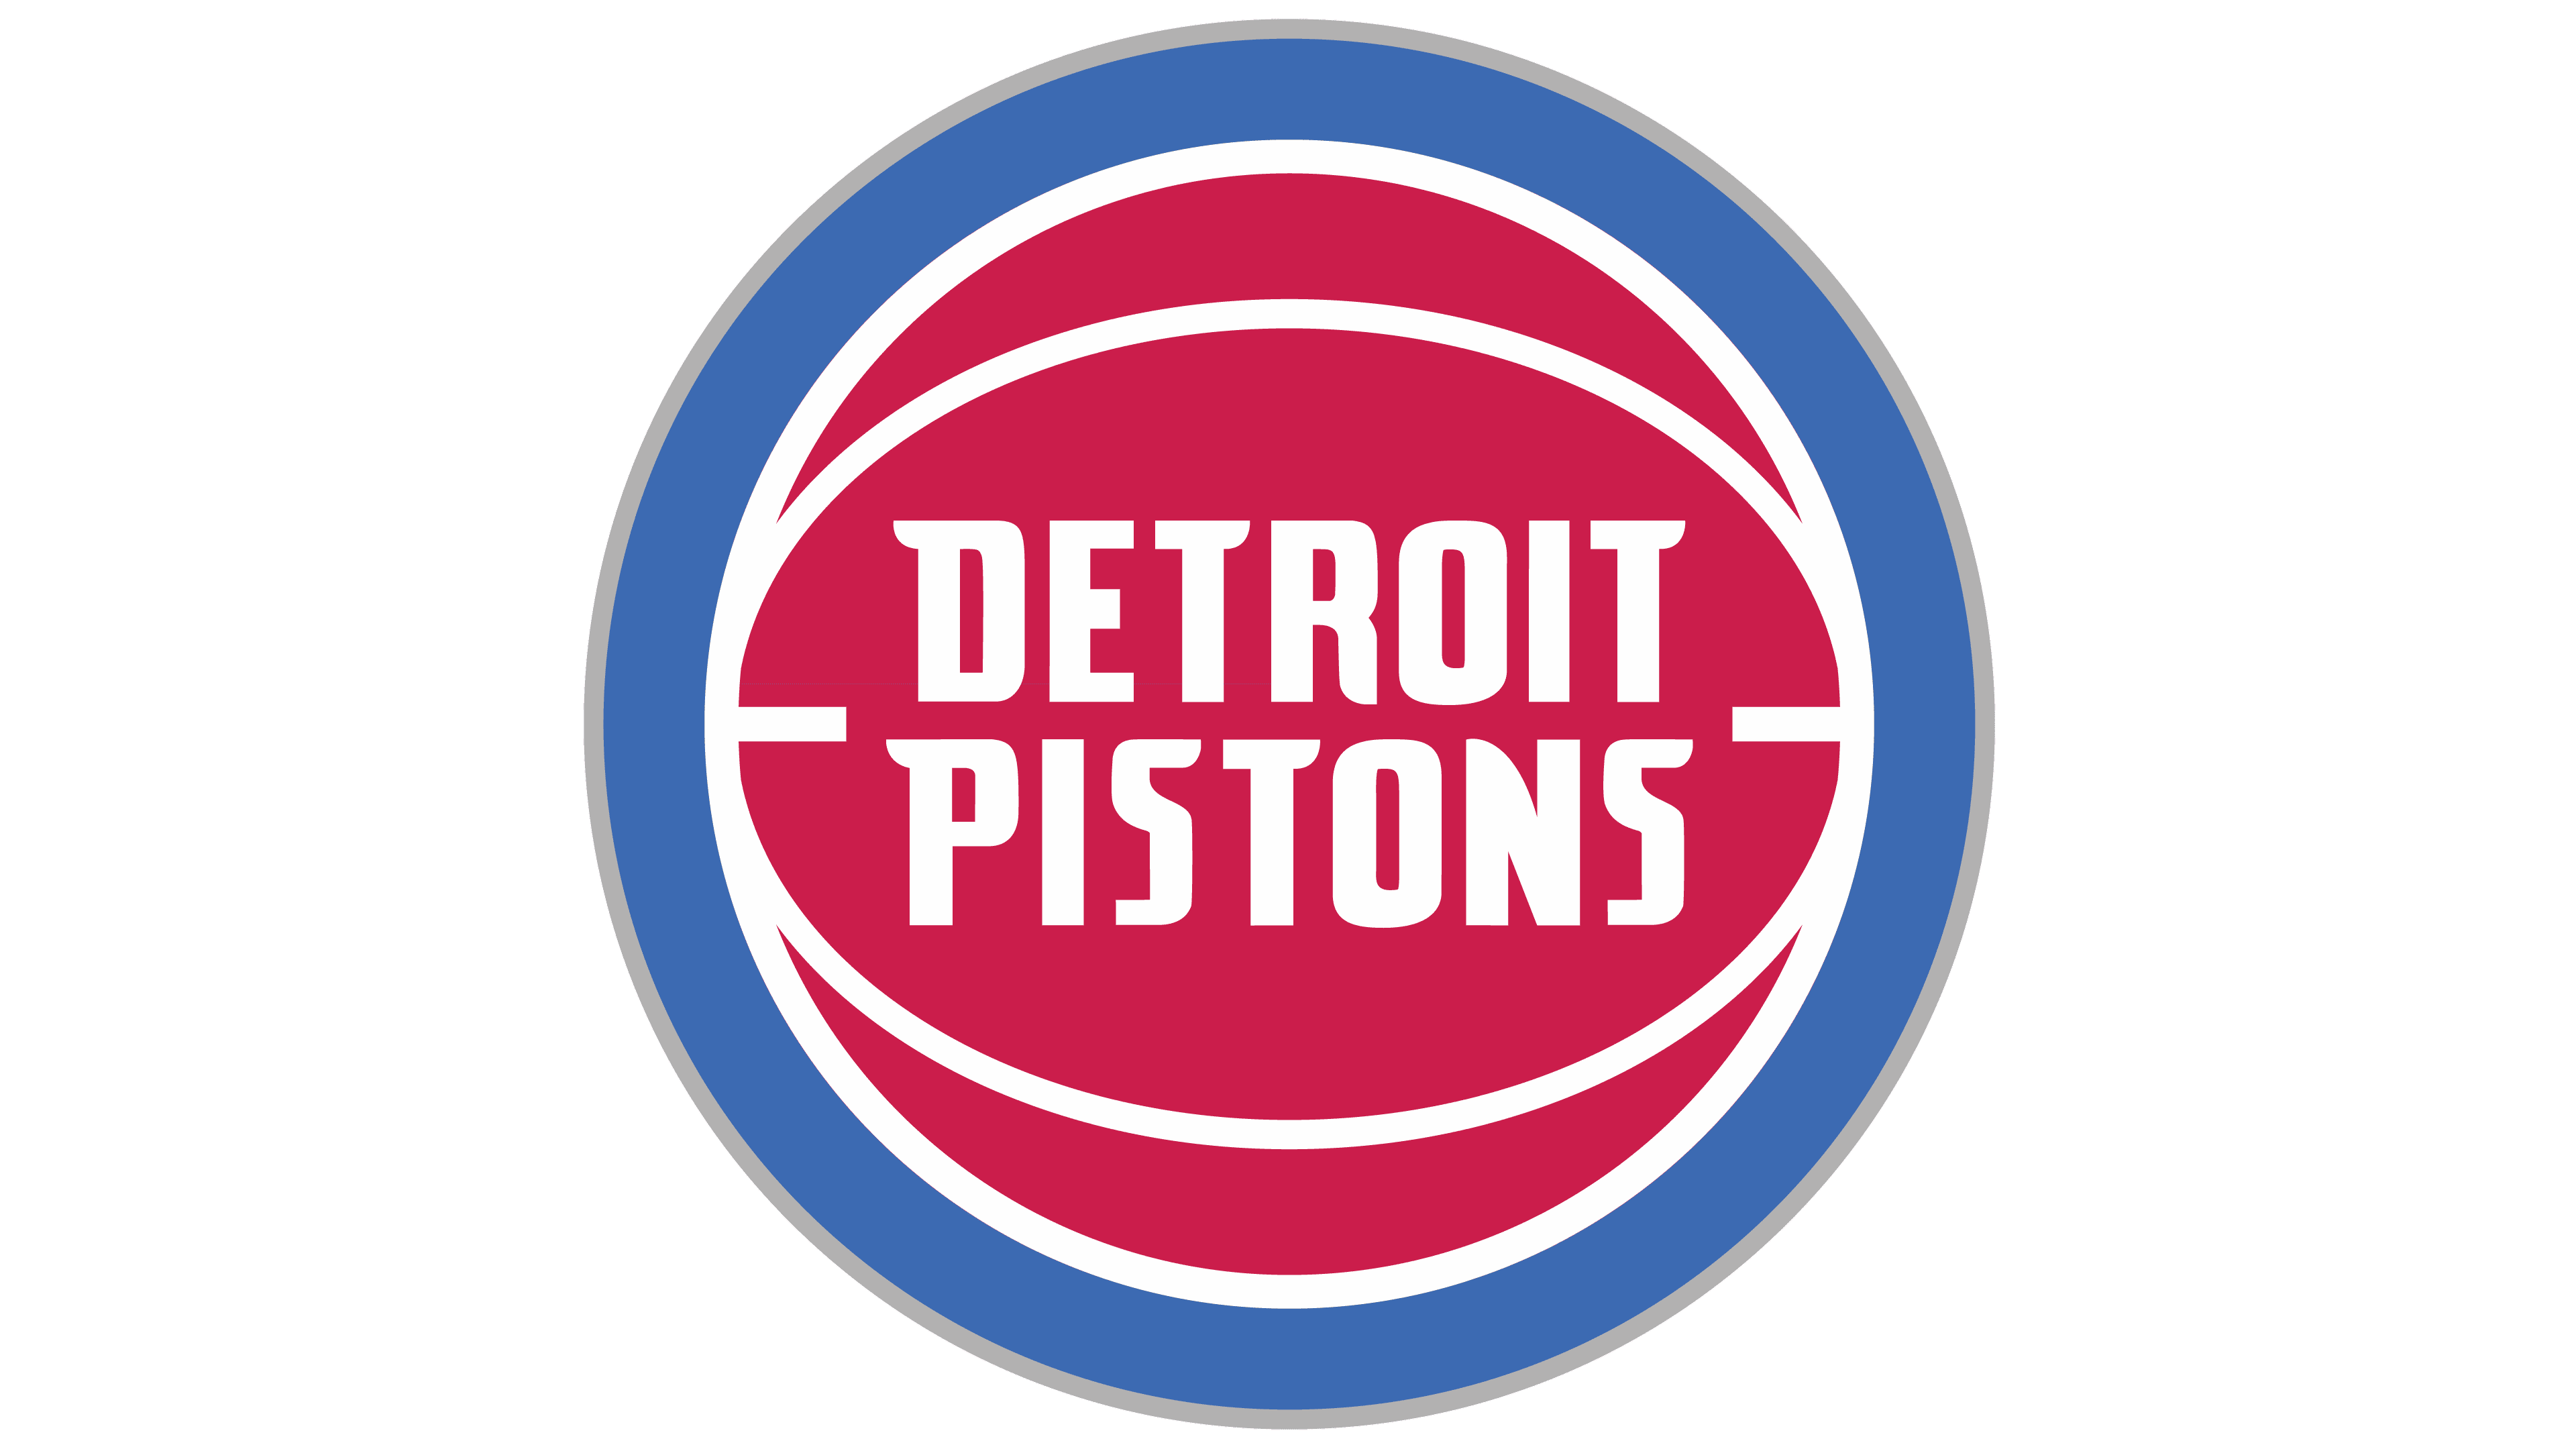 Detroit Pistons Logo, PNG, Symbol, History, Meaning